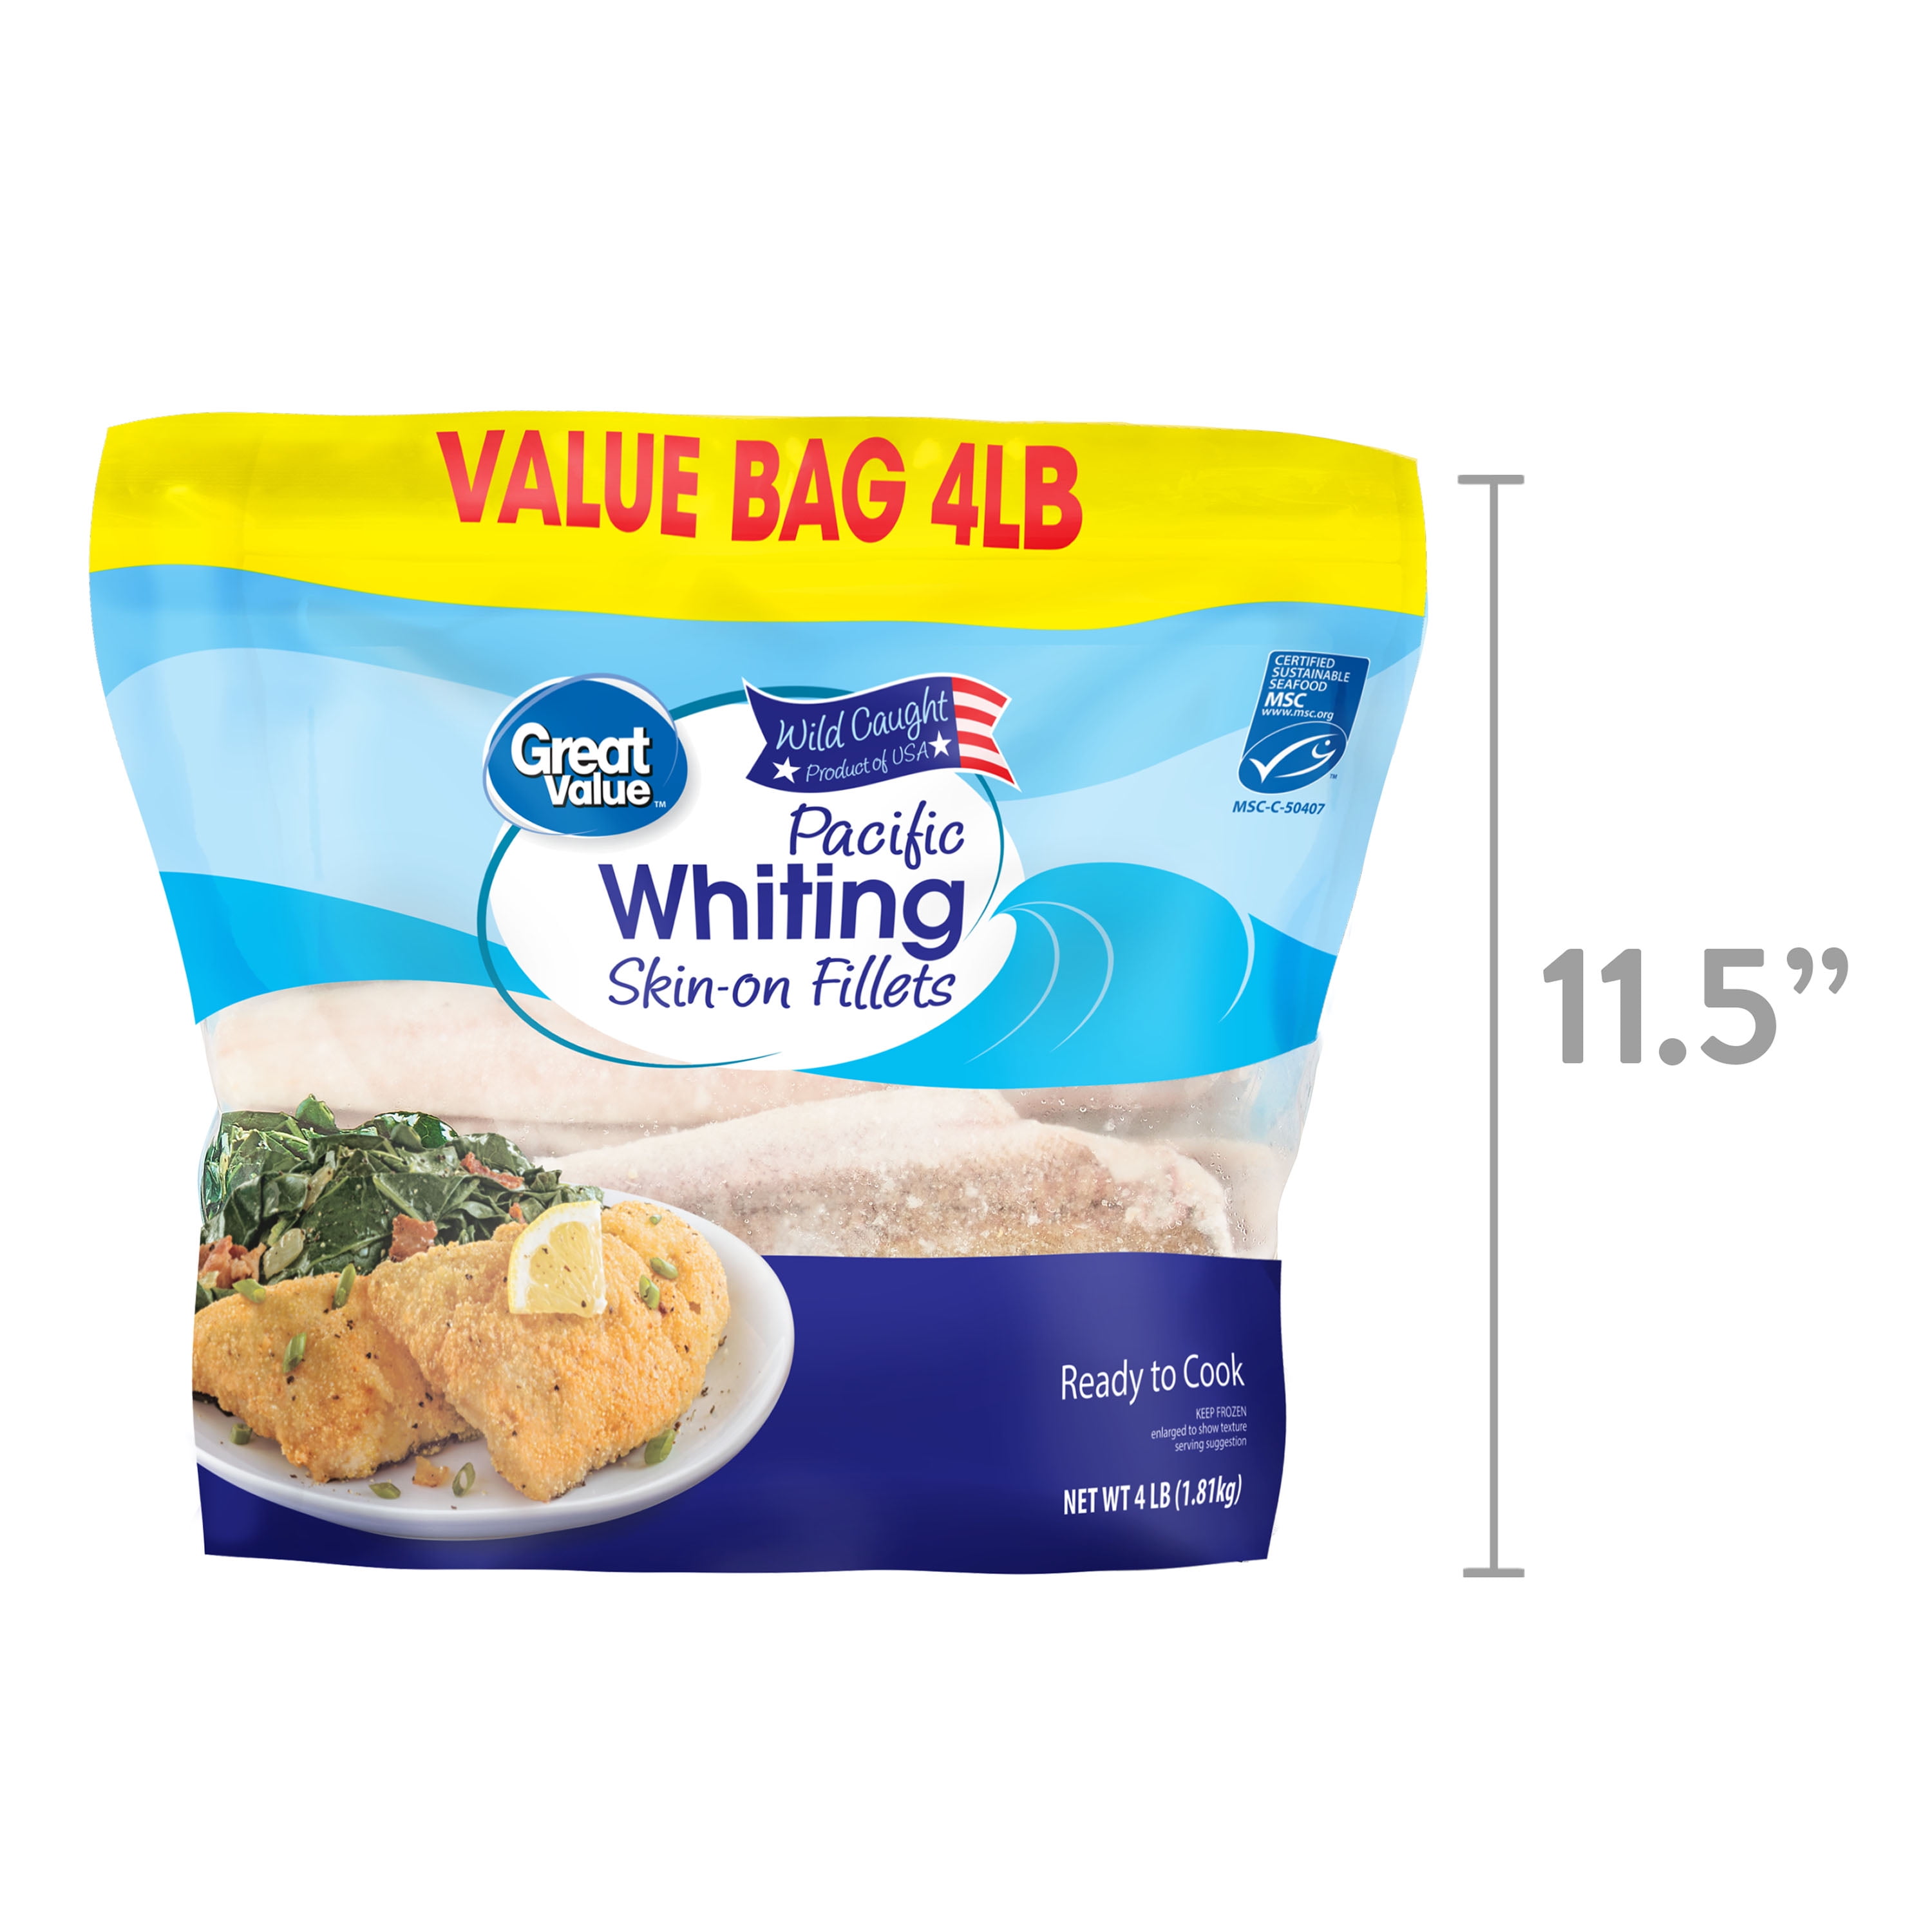 Great Value Wild Caught Pacific Whiting Fillets, Skin-on, Value Bag, 4 lbs  (Frozen) 